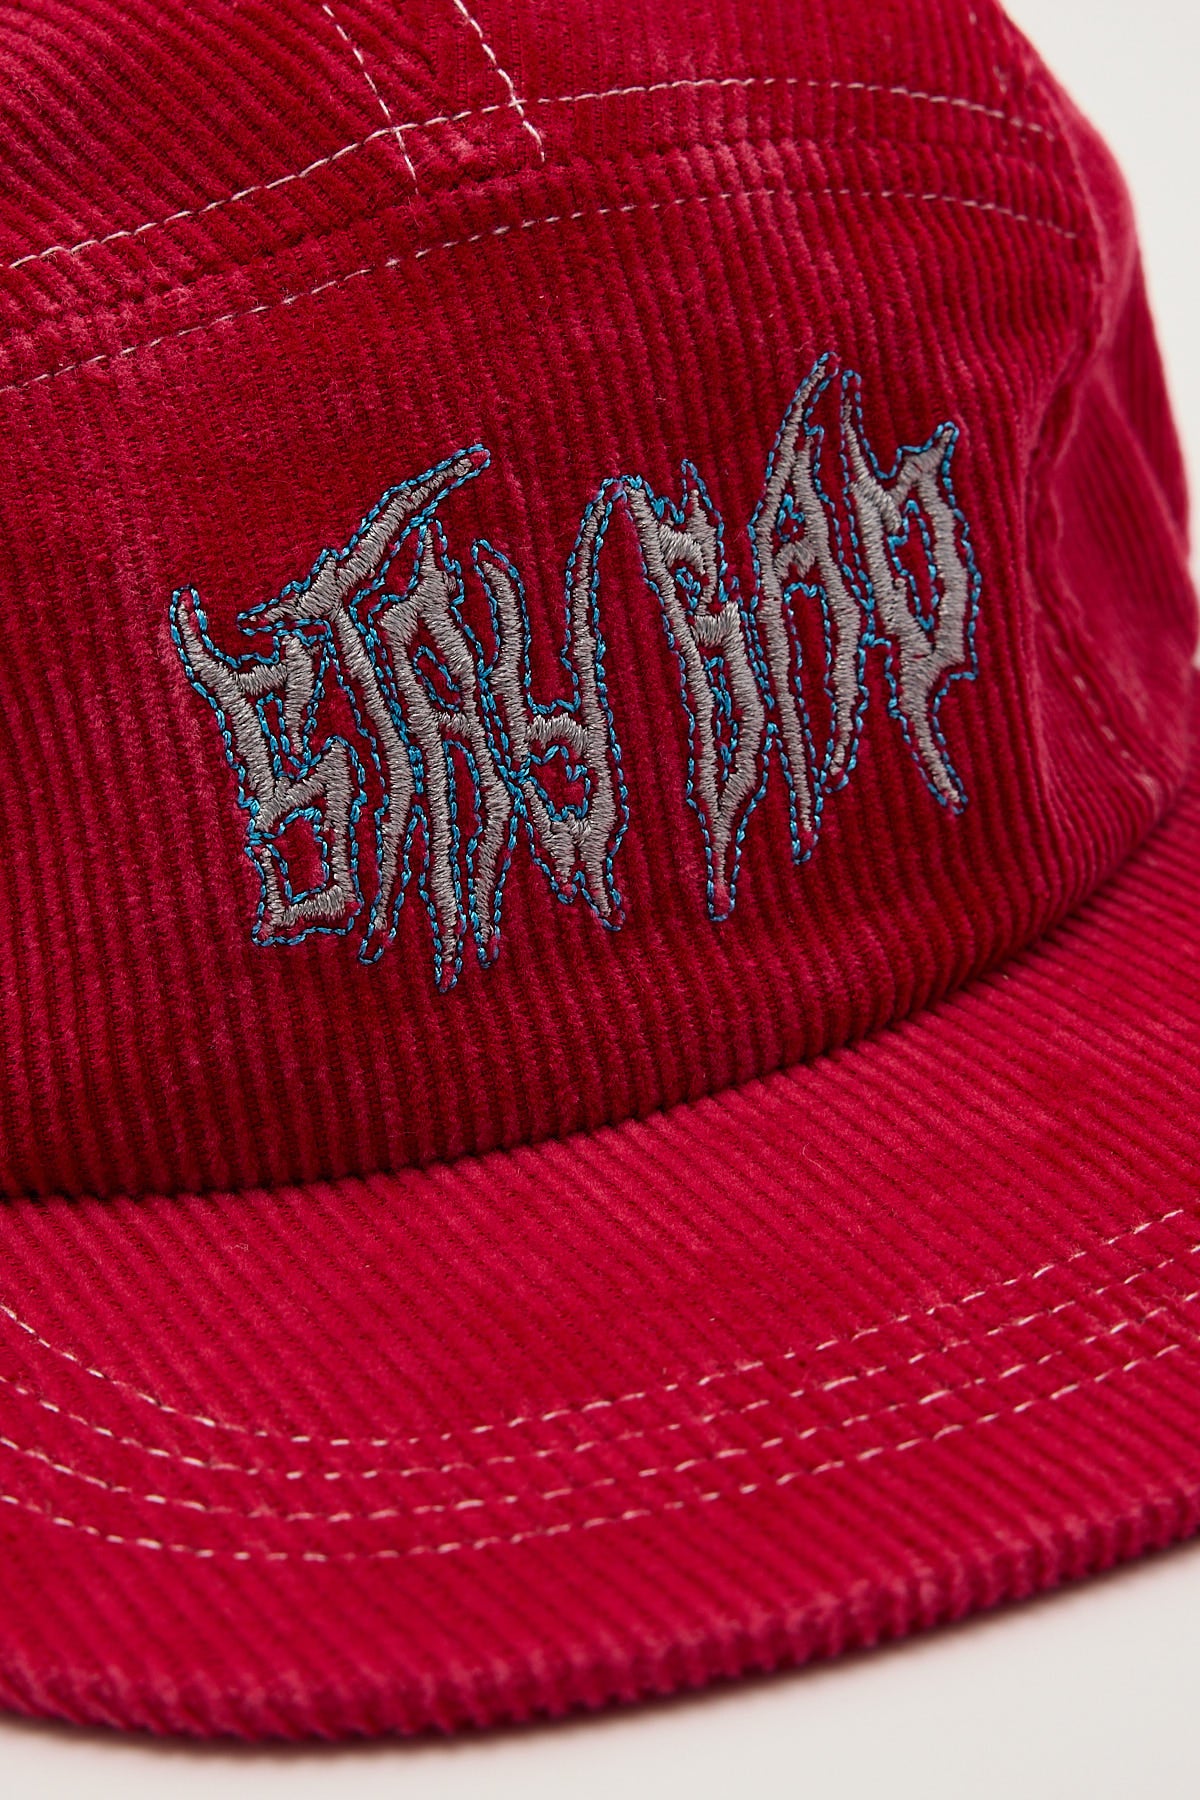 Billy Bones Club Stay Bad 5 Panel Red Cord